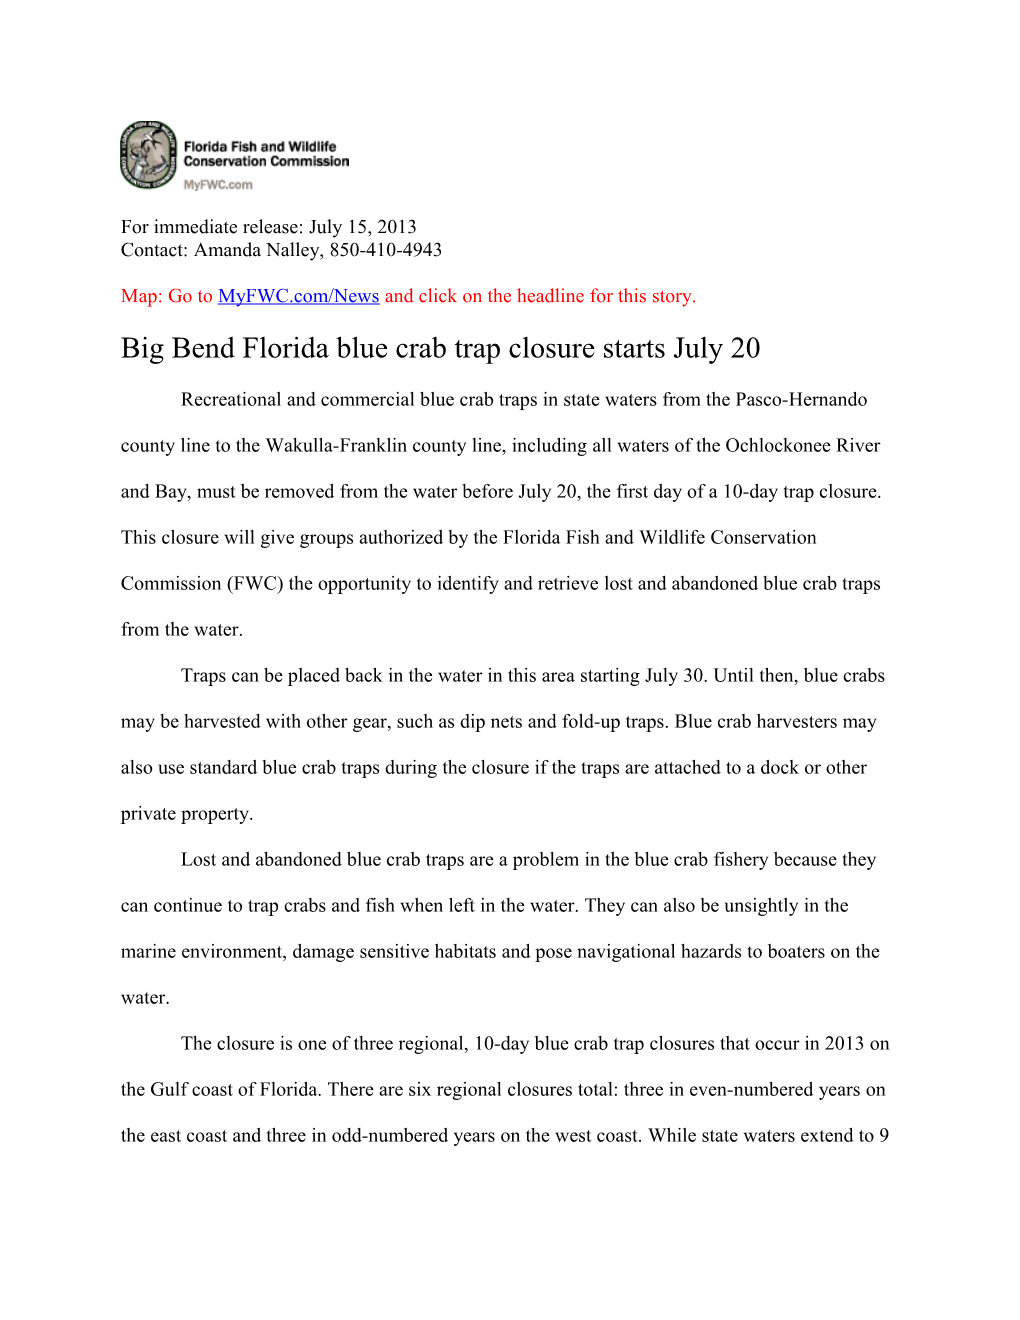 For Immediate Release: March 28, 2008